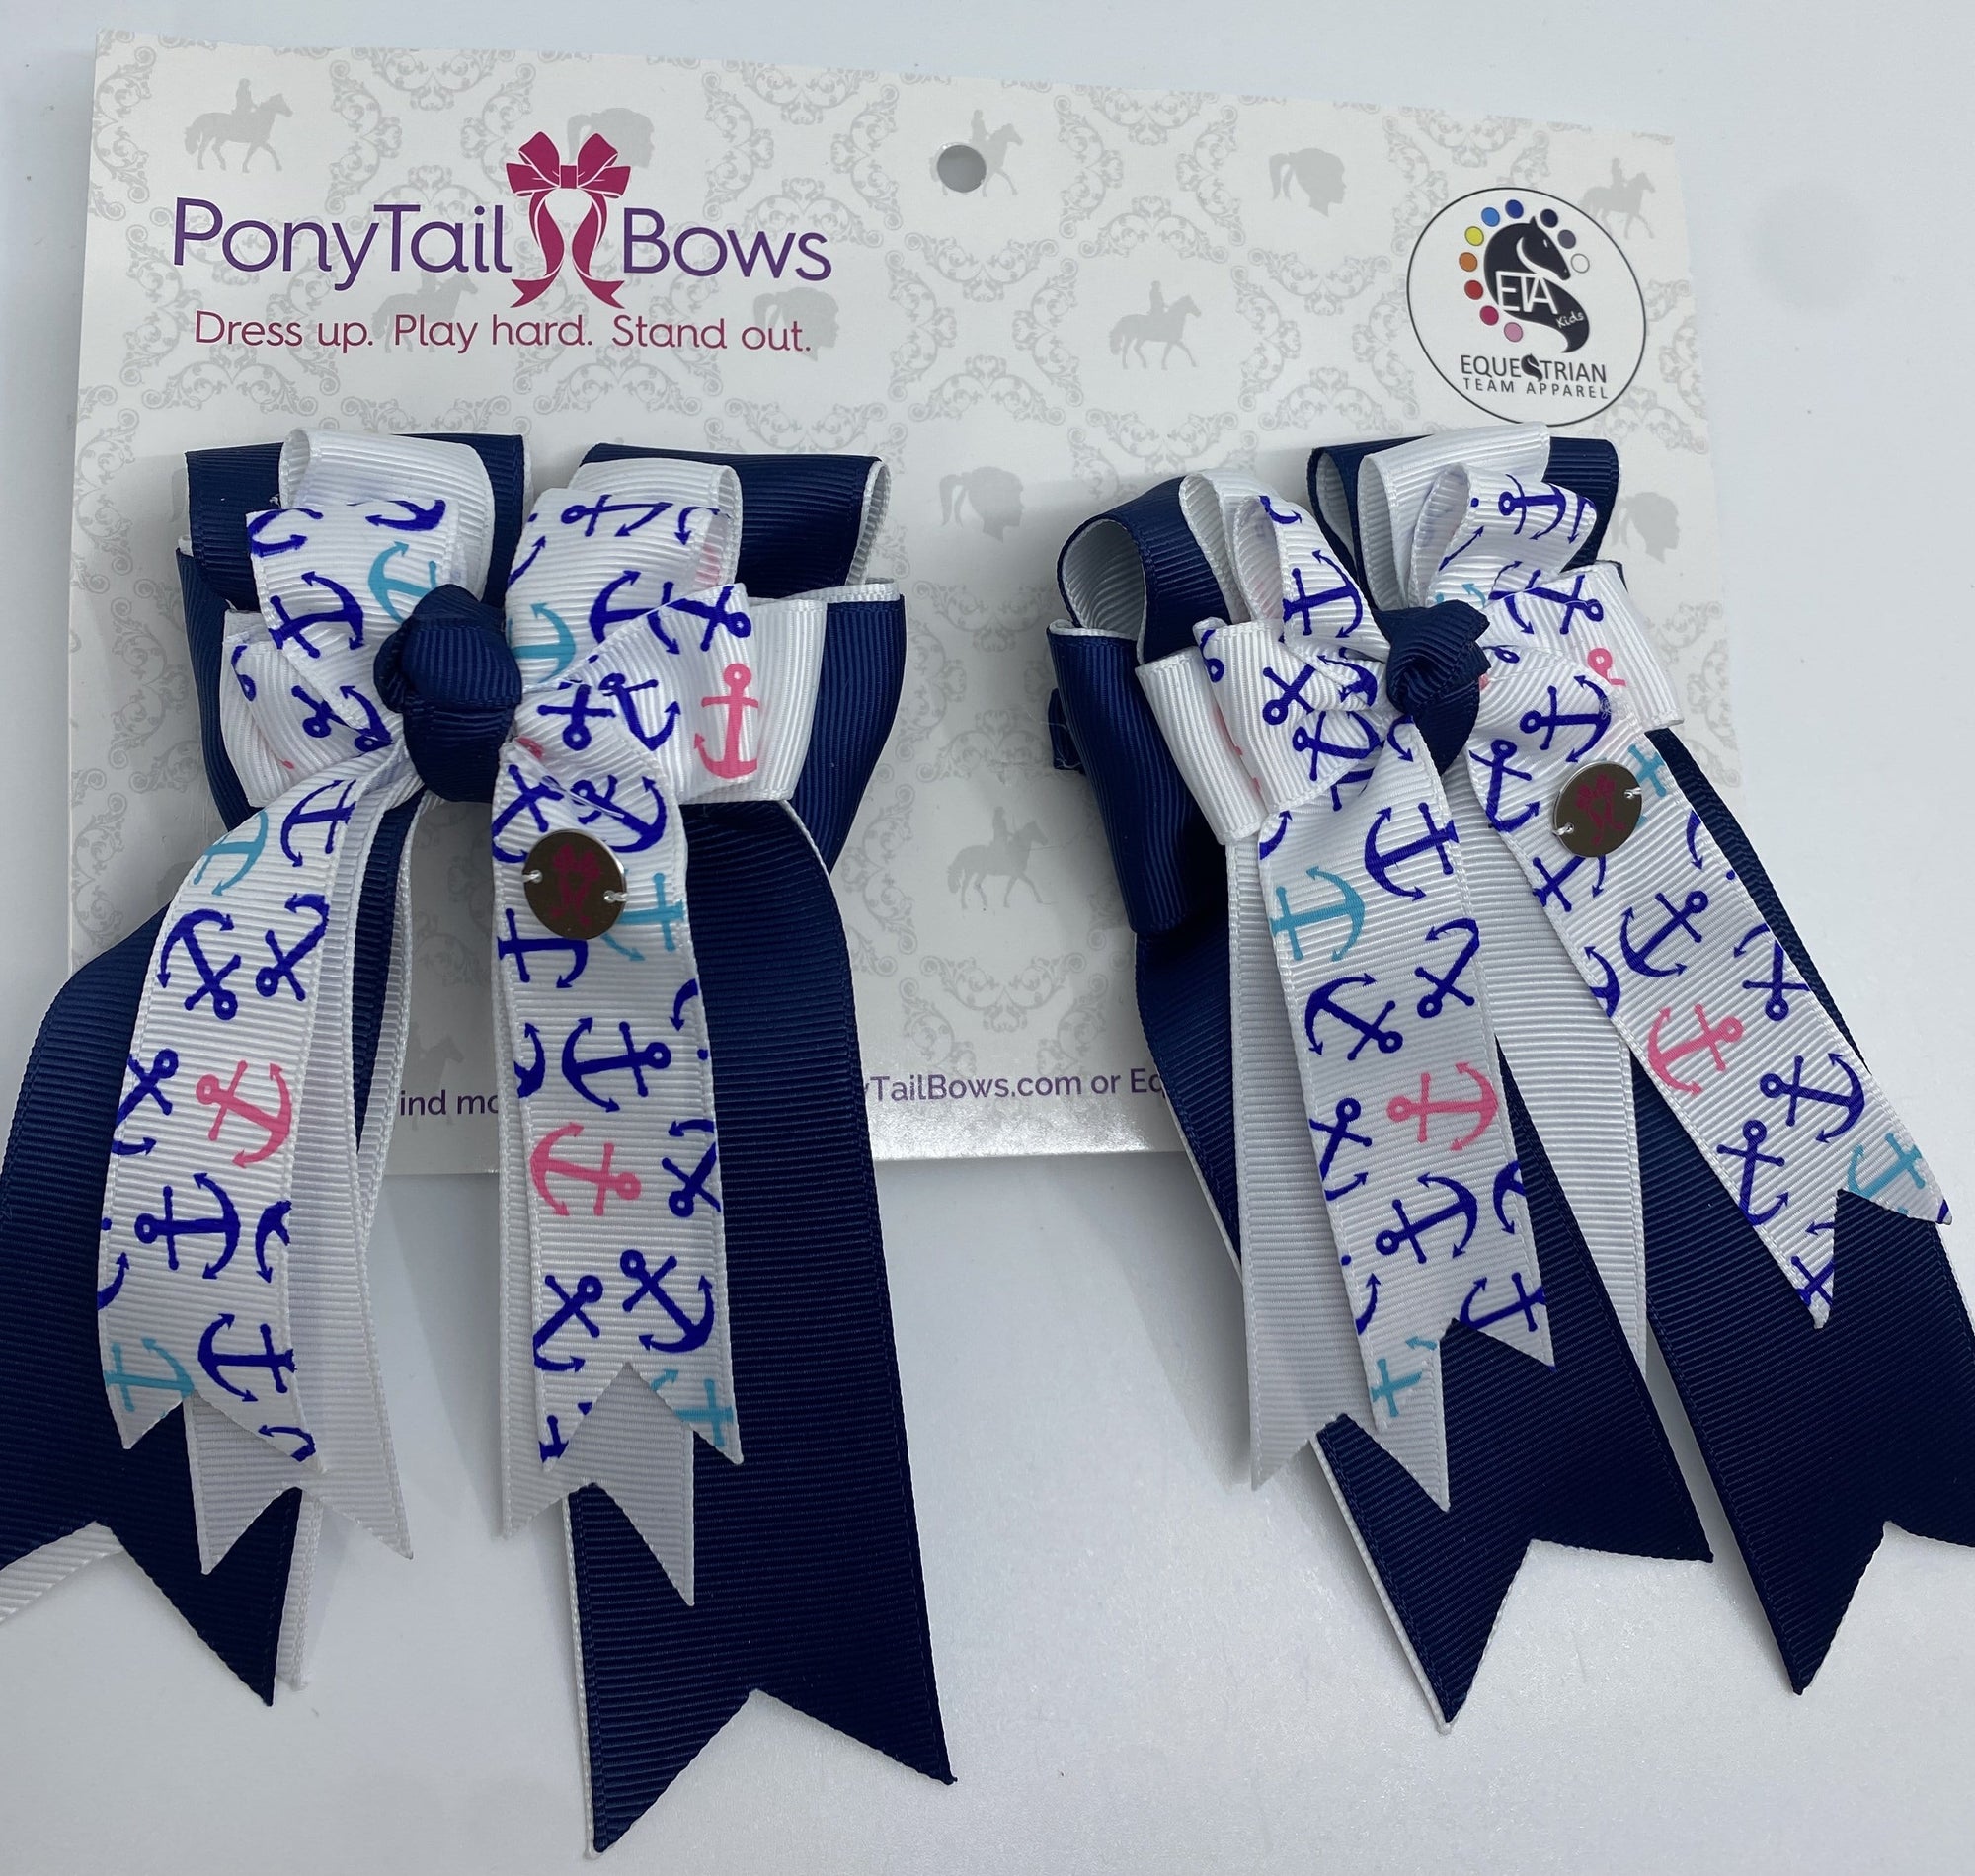 PonyTail Bows 3" Tails Below Deck Navy PonyTail Bows equestrian team apparel online tack store mobile tack store custom farm apparel custom show stable clothing equestrian lifestyle horse show clothing riding clothes PonyTail Bows | Equestrian Hair Accessories horses equestrian tack store